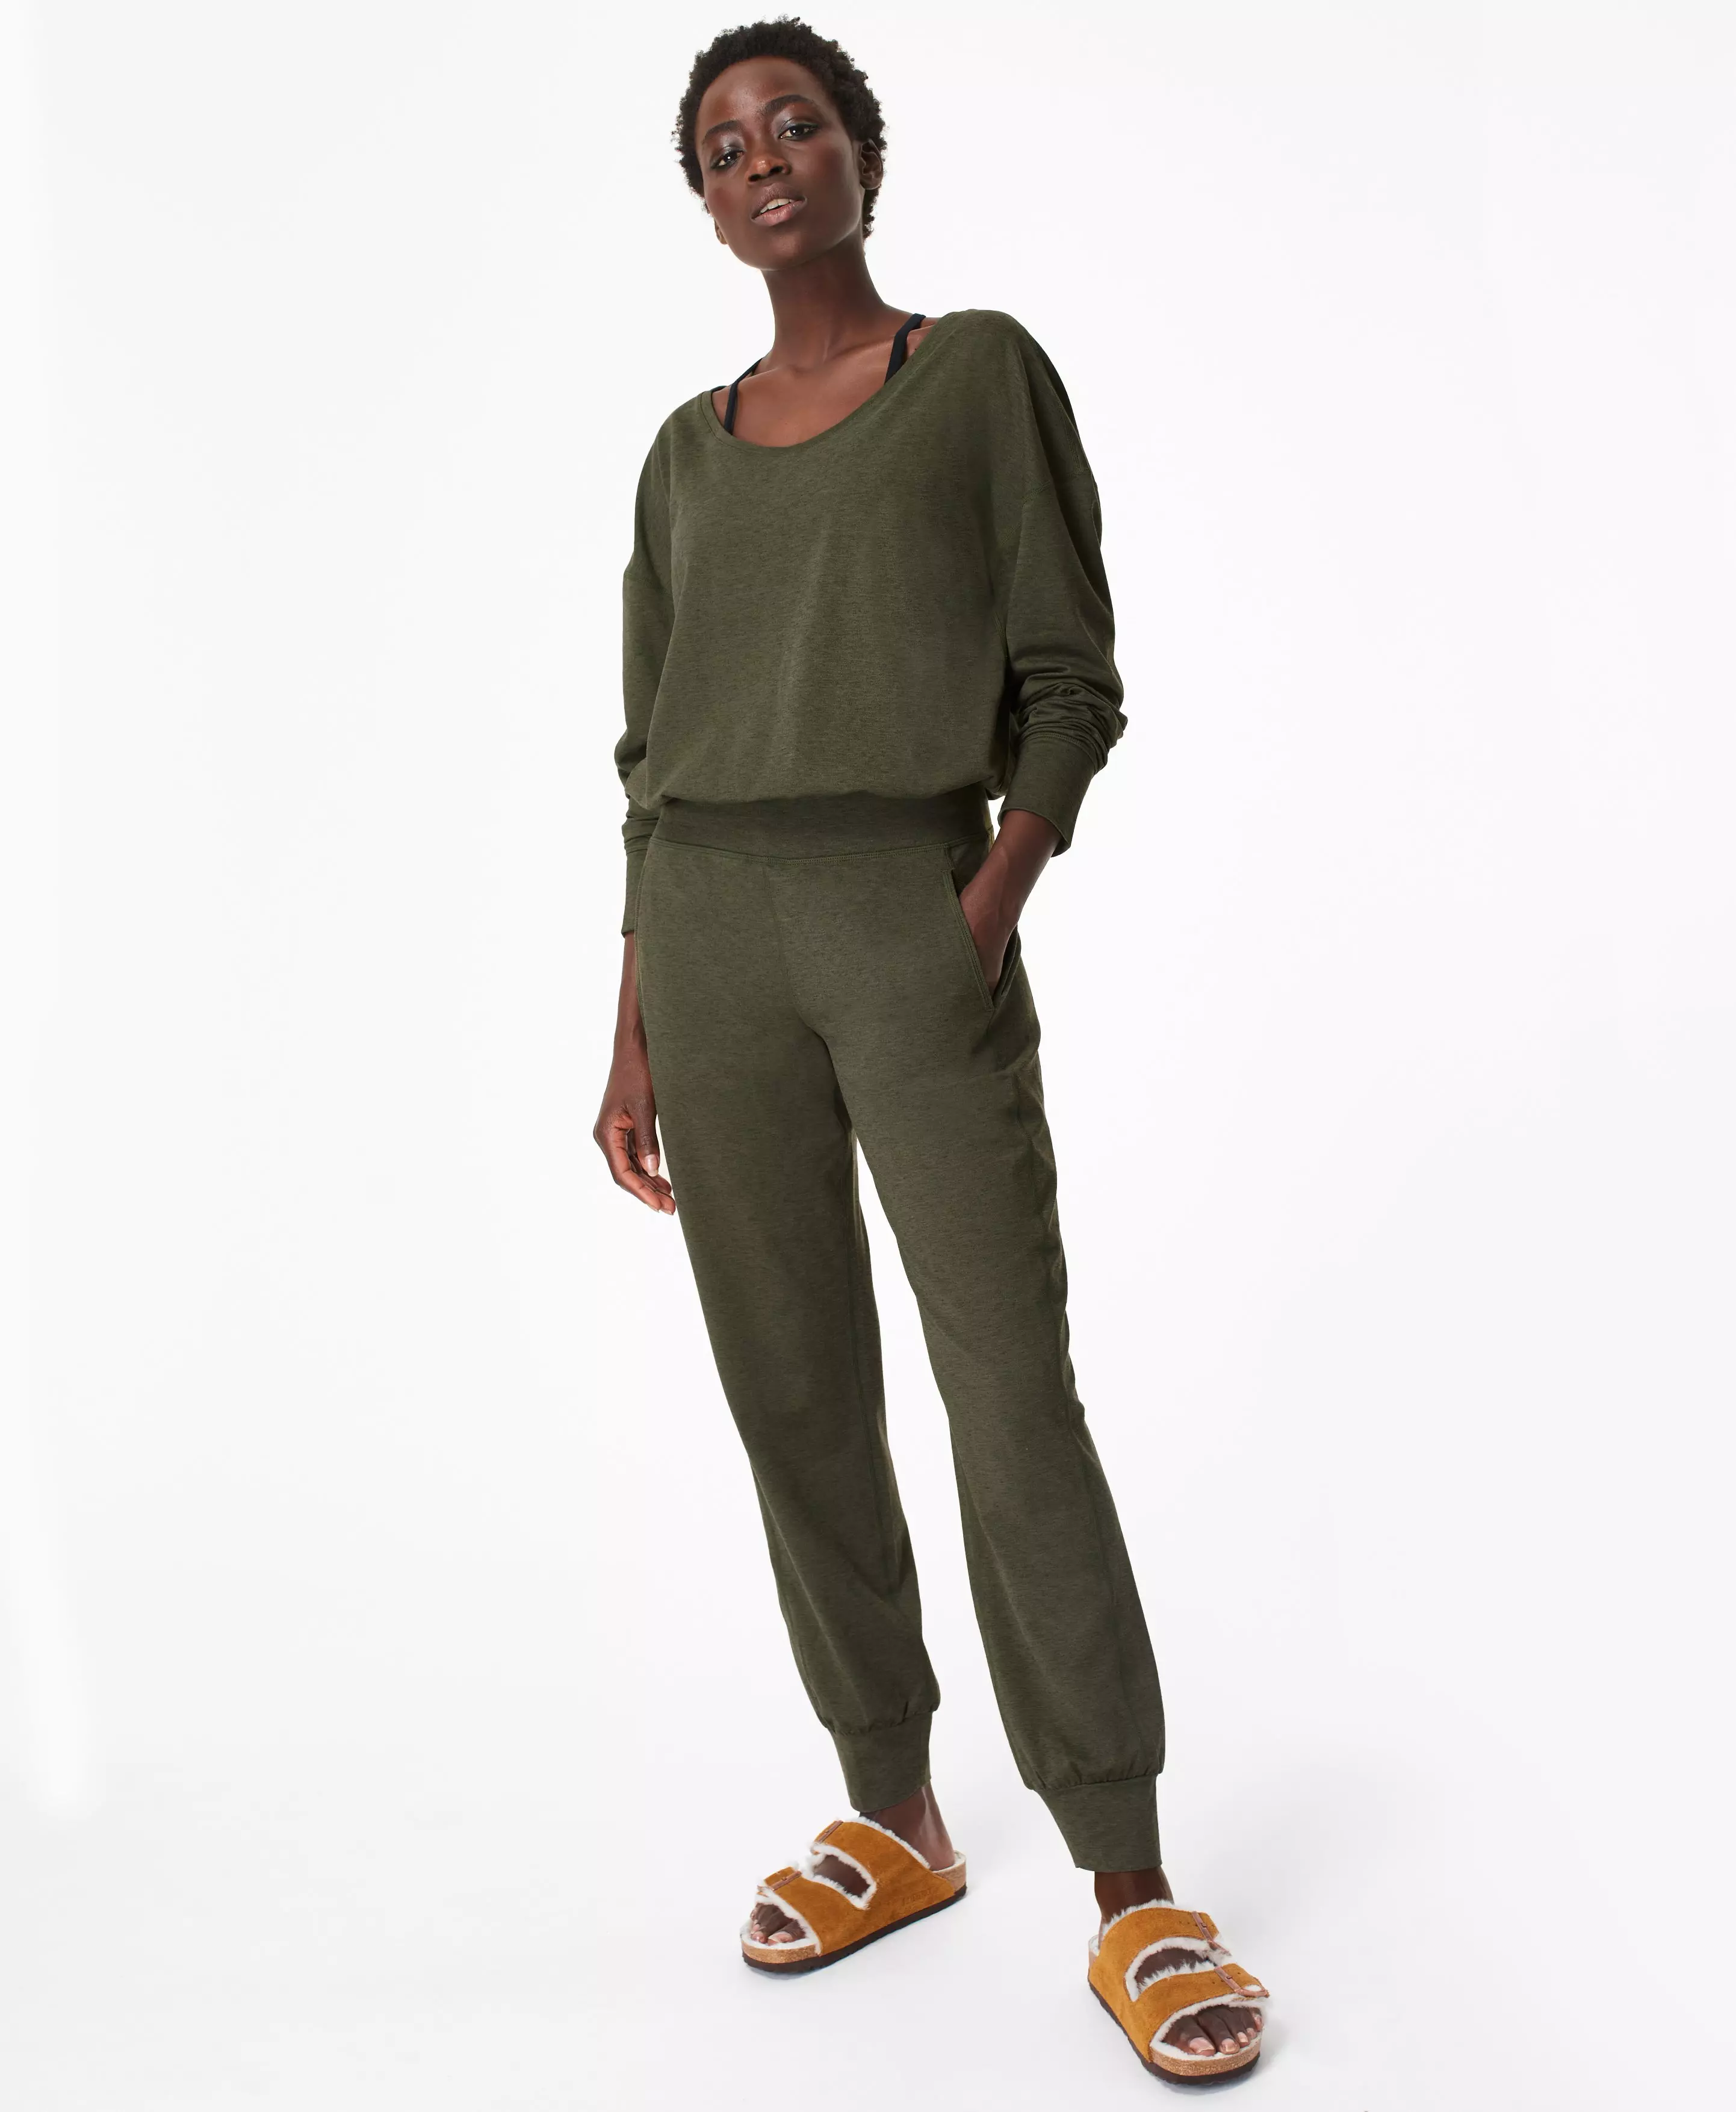 8 lounge jumpsuits that will elevate your cozy WFH style